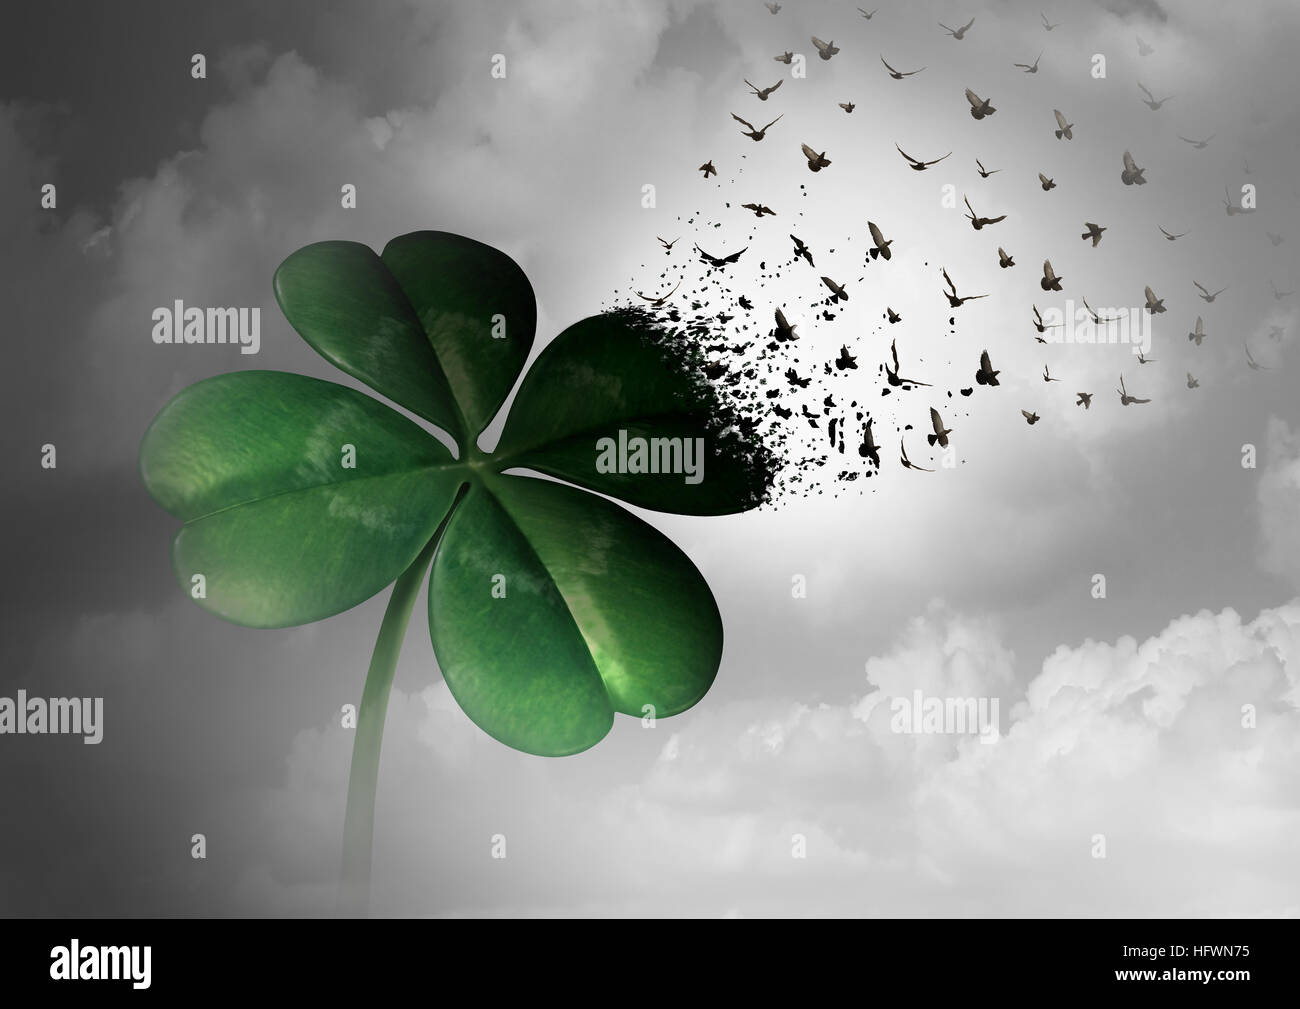 Losing luck or spreading good fortune concept as a four leaf clover transforming into flying birds as a surreal communication metaphor for financial a Stock Photo